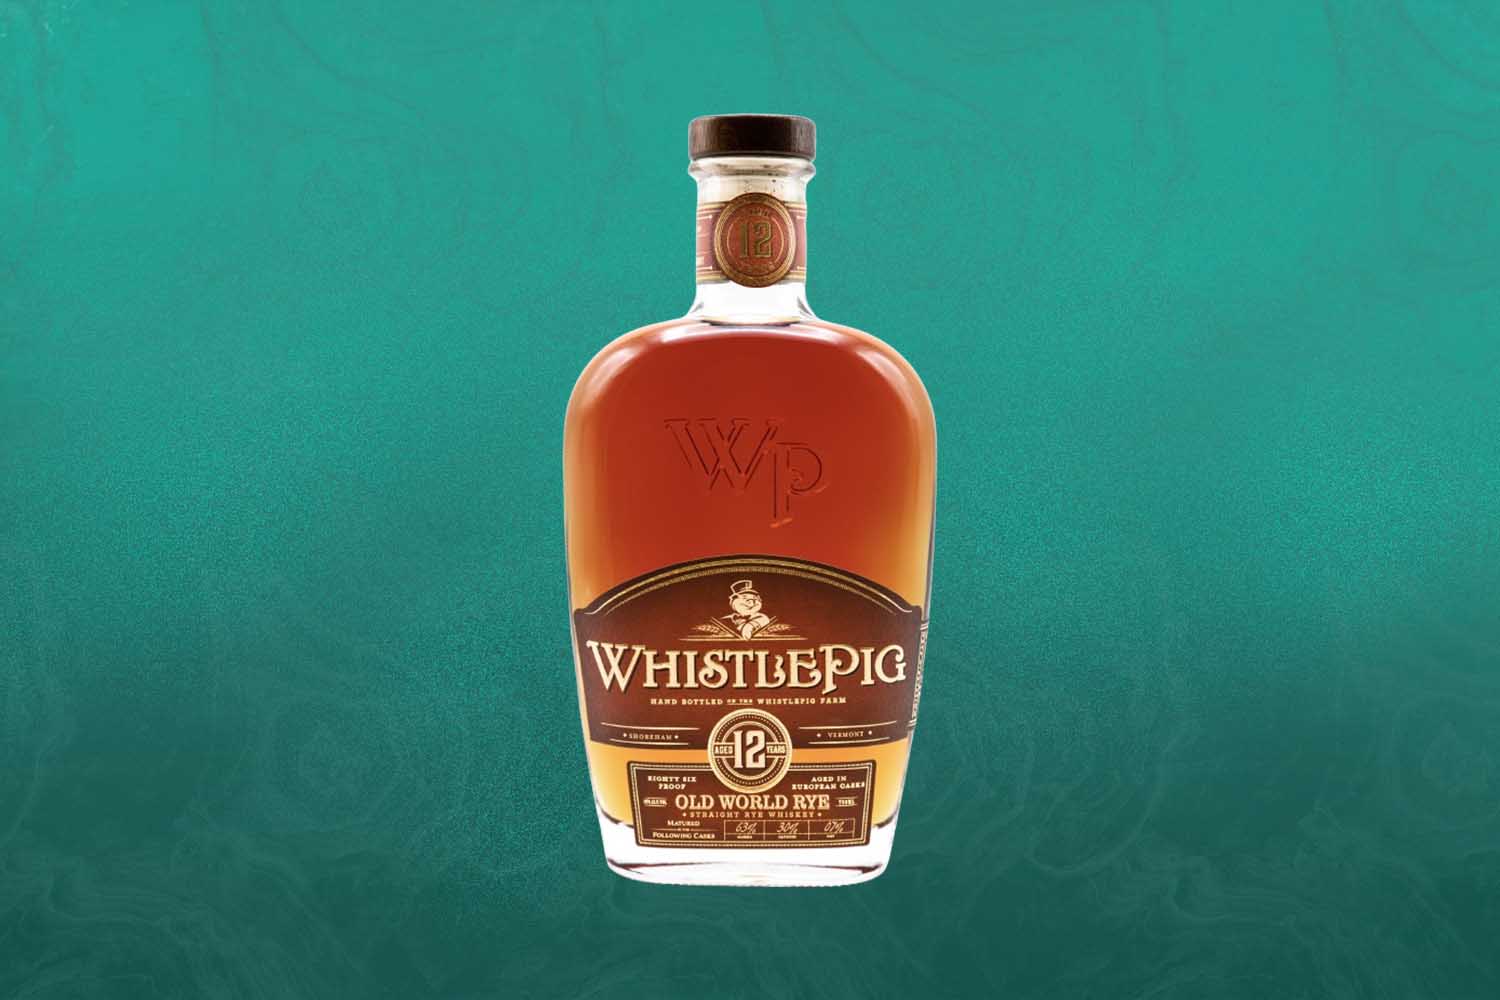 WhistlePig 12 Year Old World Rye